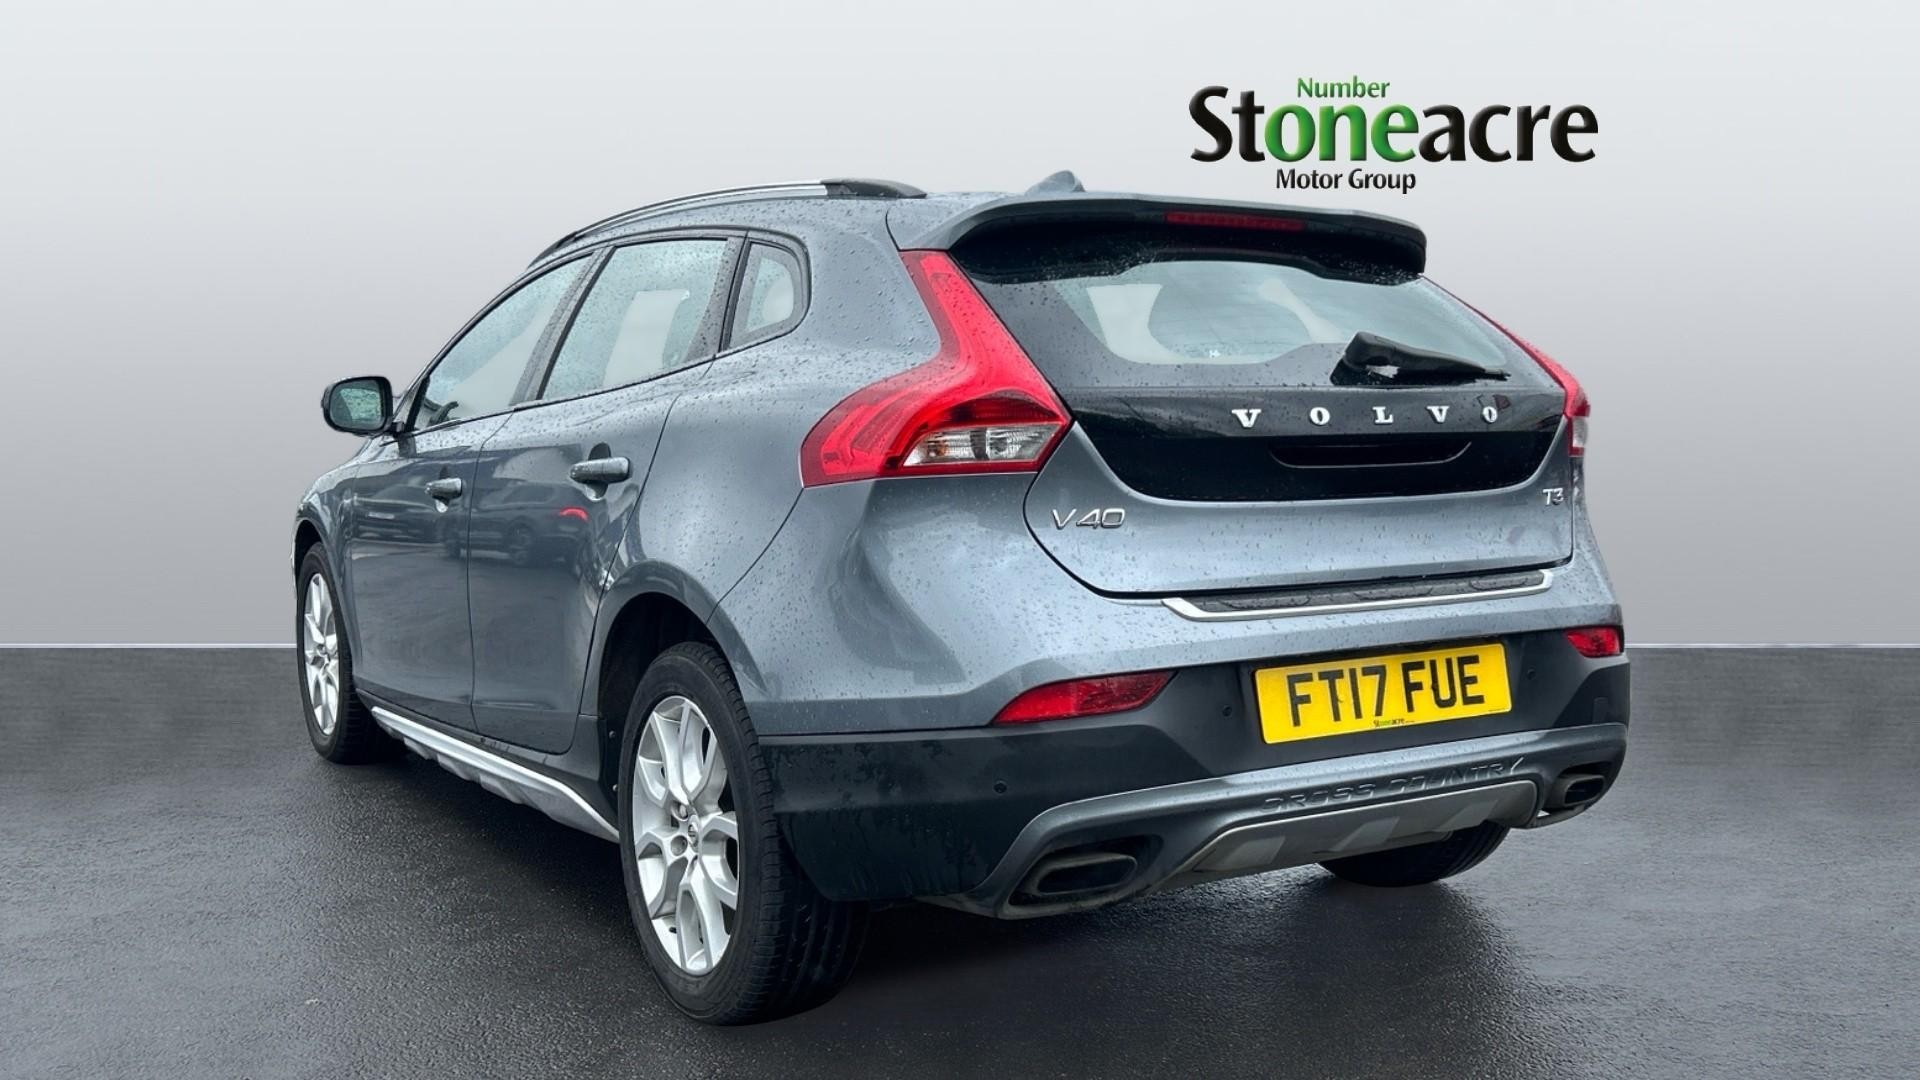 Volvo V40 Cross Country 1.5 T3 Pro Auto Euro 6 (s/s) 5dr (FT17FUE) image 1